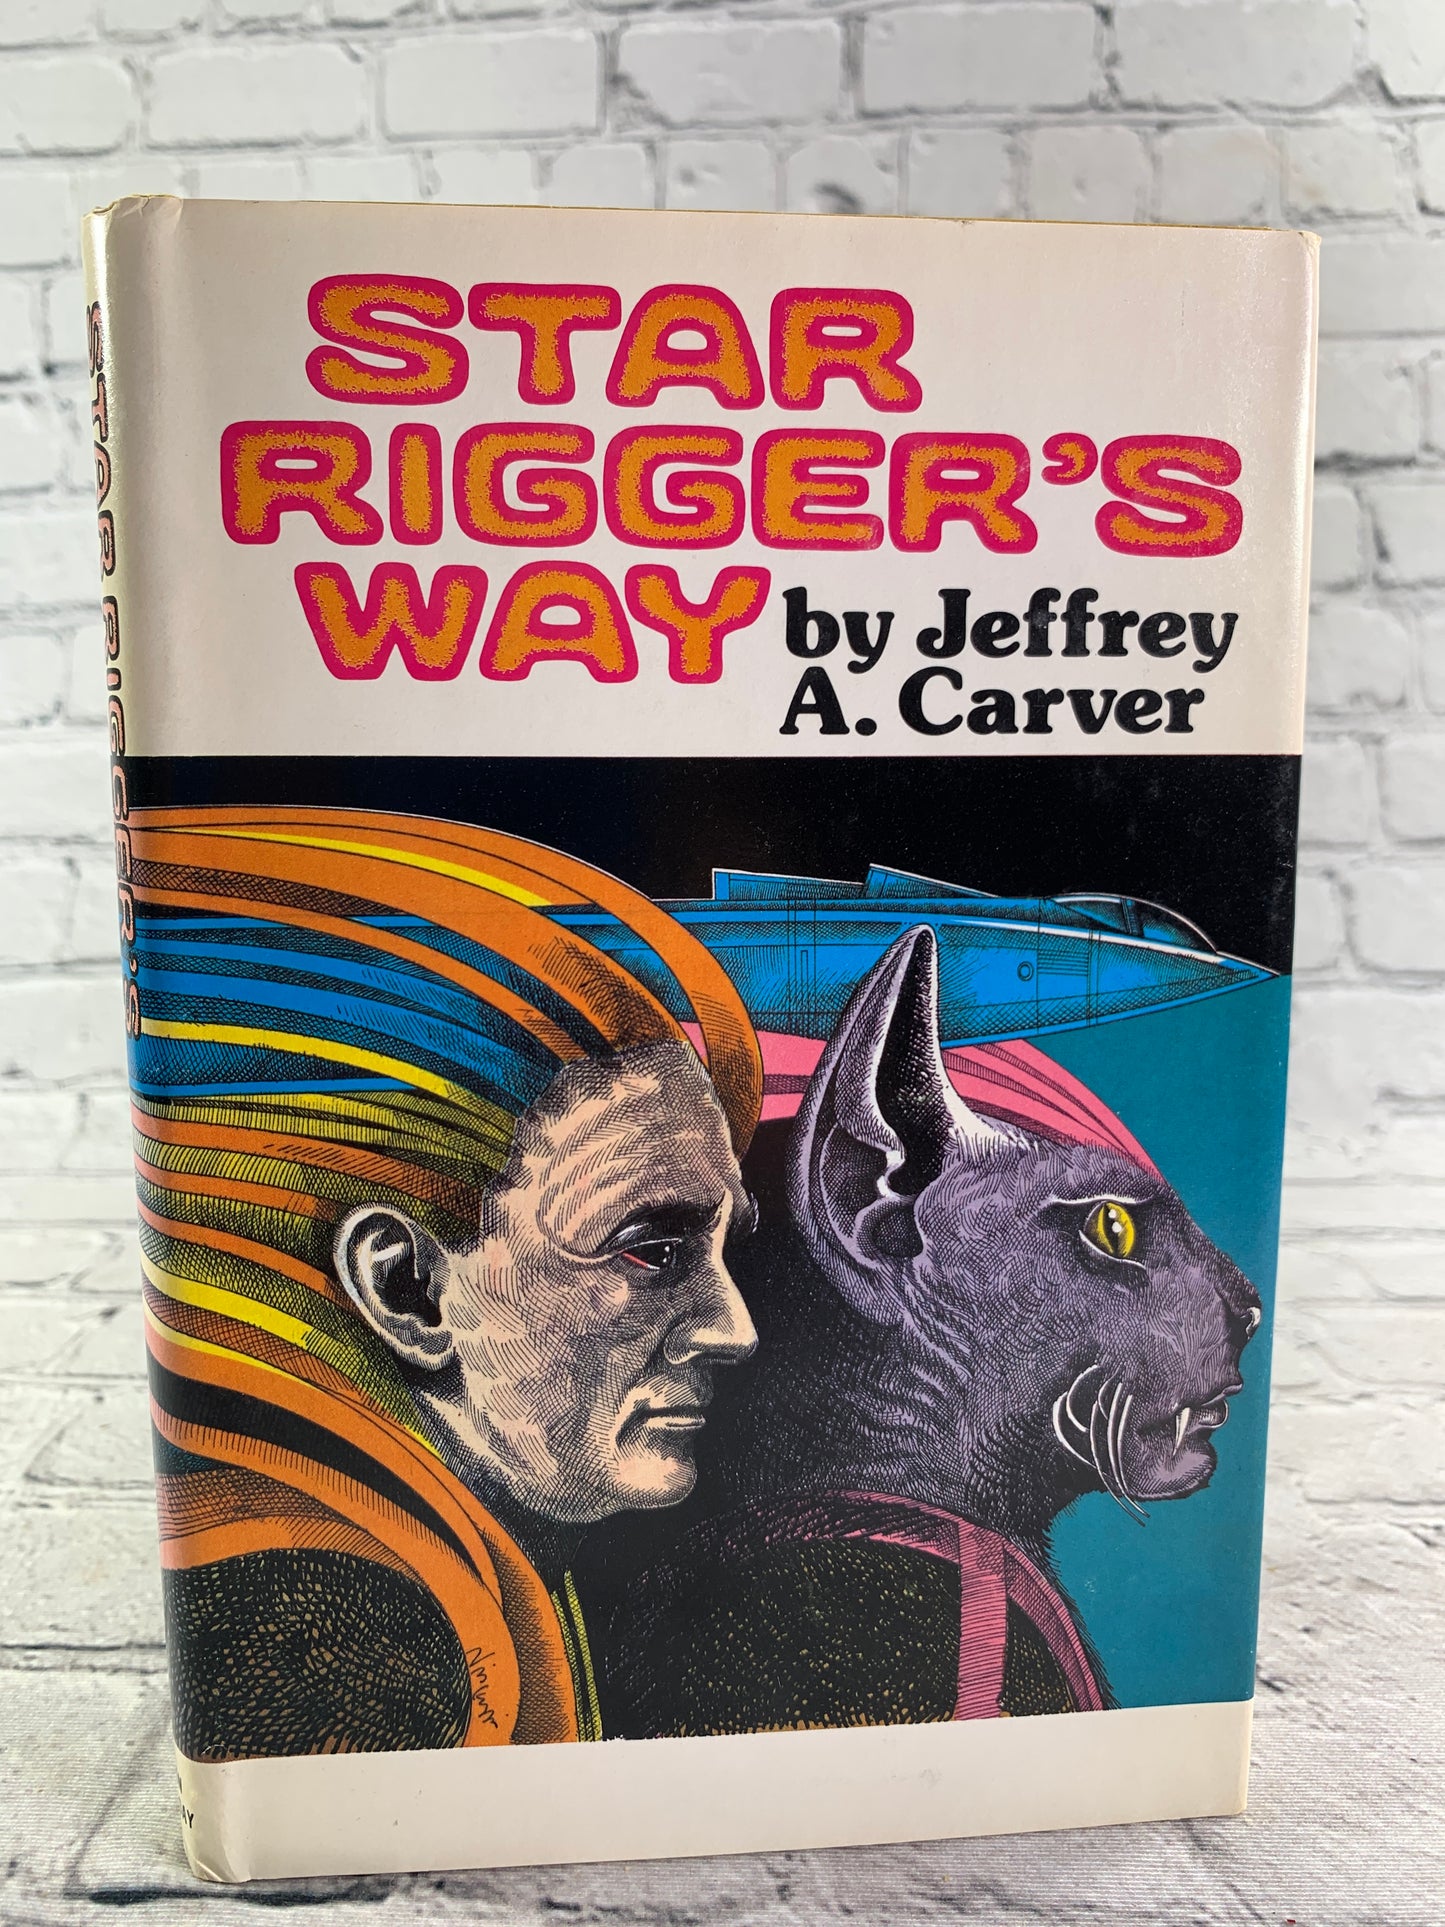 Star Rigger's Way by Jeffrey A. Carver [BCE · 1978]